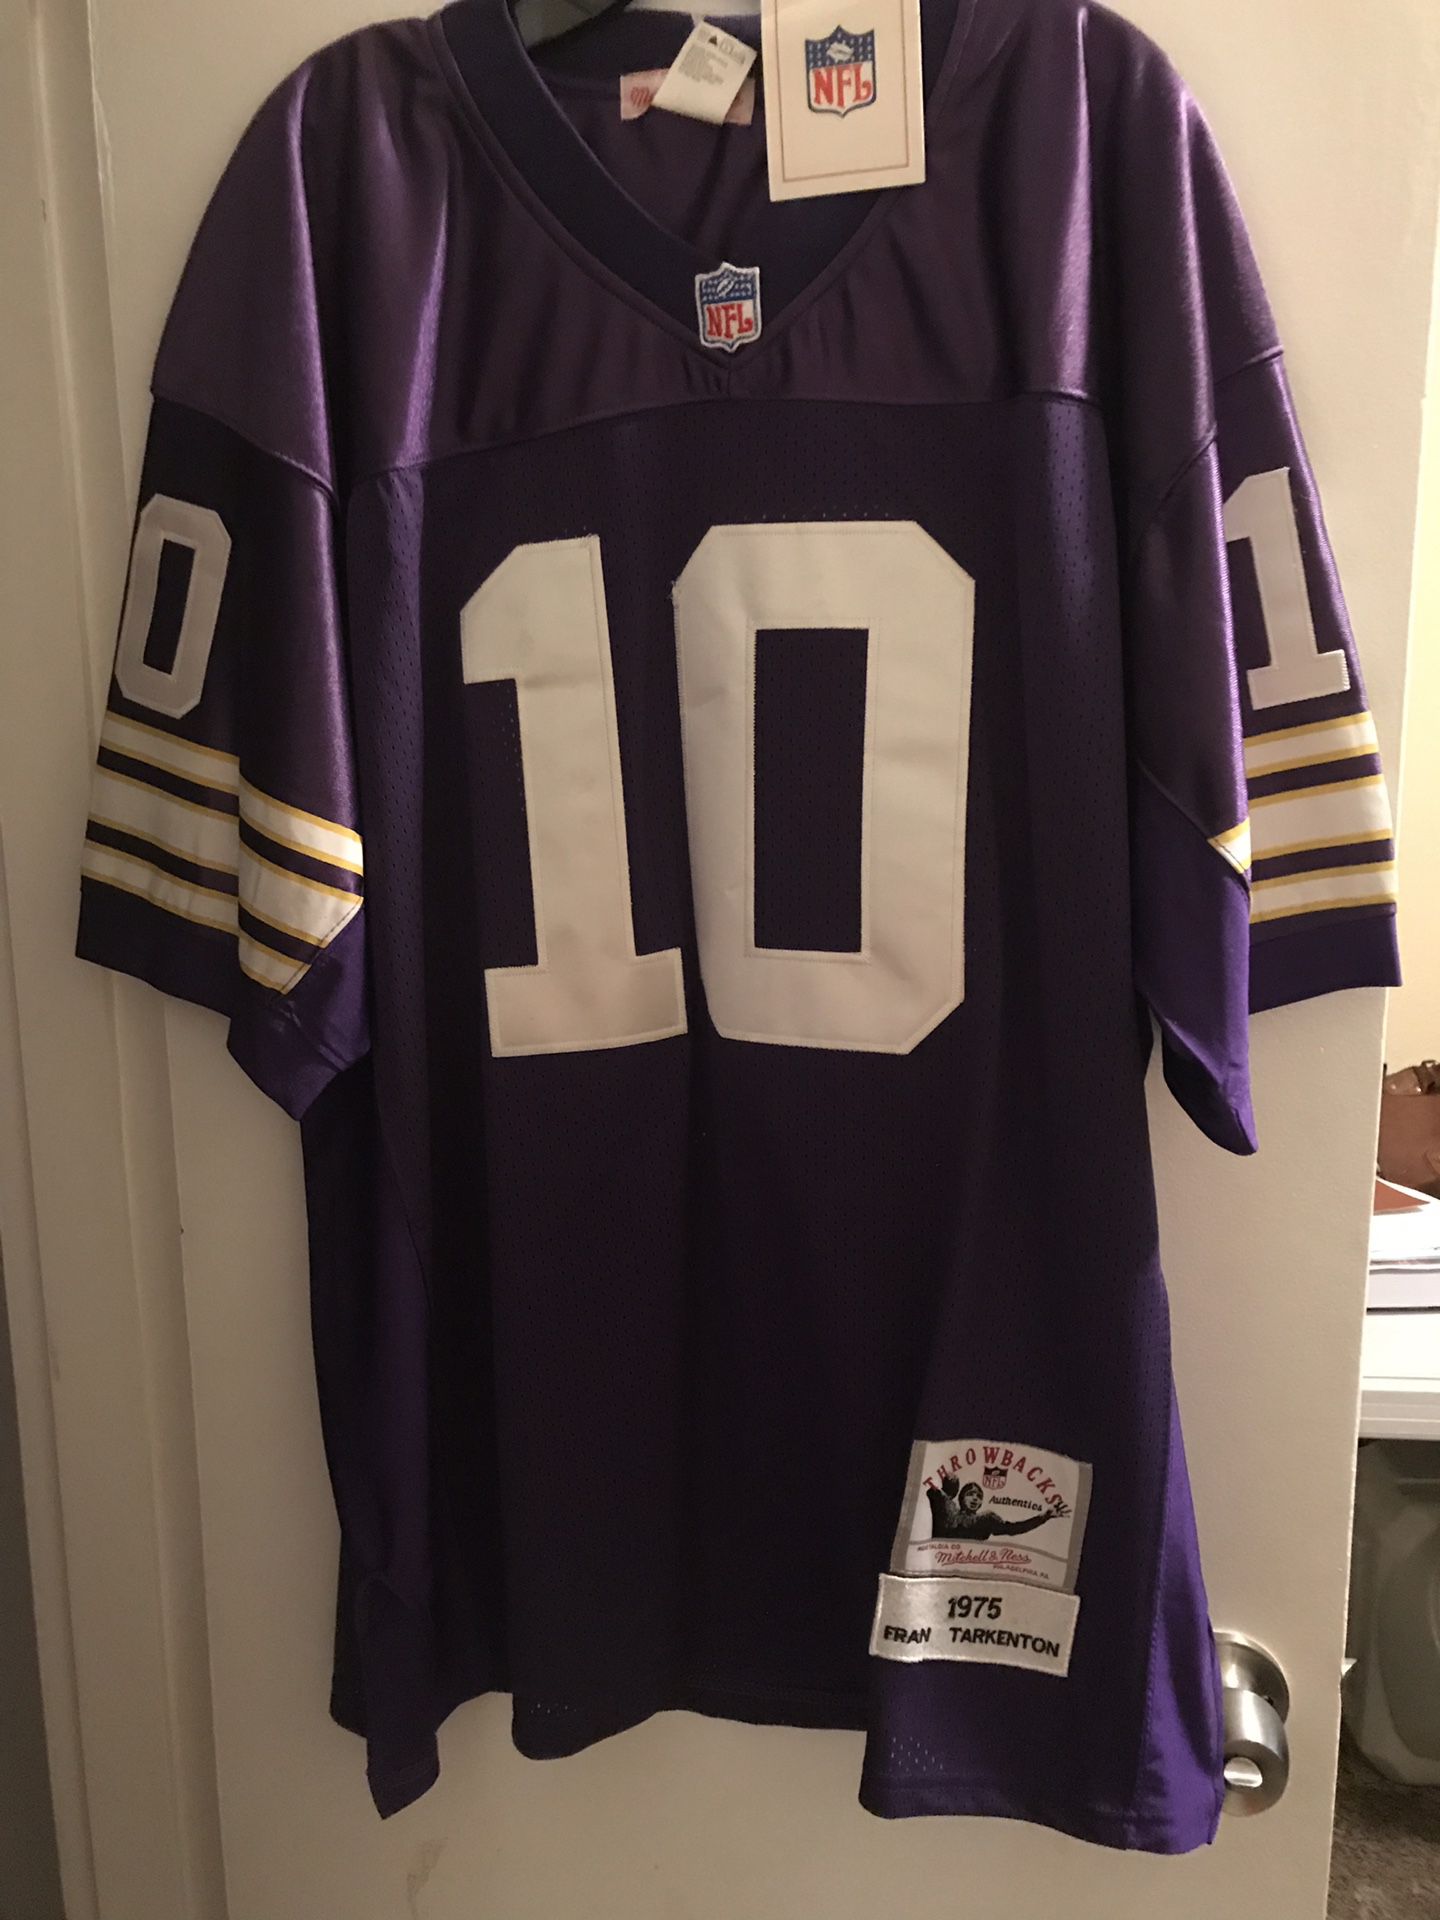 NFL Jersey - mitchell and ness fran tarkenton jersey for Sale in ...